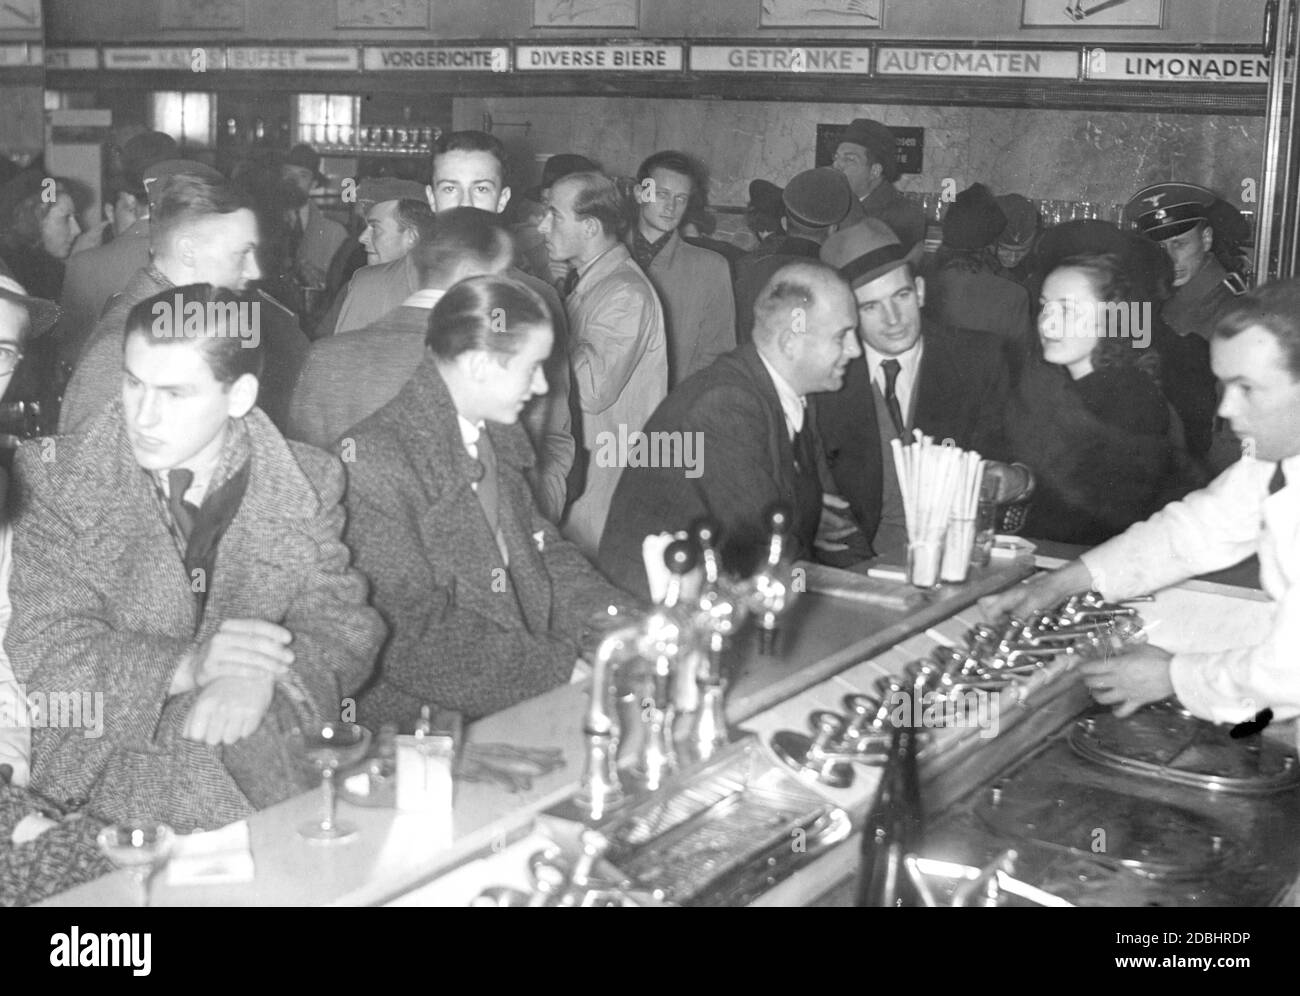 'The photo is intended to demonstrate the cheerful mood of the Berlin population in October 1939 after the outbreak of war. Many guests crowd into a bar or sit at the bar counter and chat. Among the guests are some Wehrmacht corporals, as well as a member of the SS (on the right, wearing a peaked cap, presumably an SS Scharfuehrer). The bar advertises with a large assortment: ''Cold buffet, starters, various beers, vending machines, lemonades.' Stock Photo